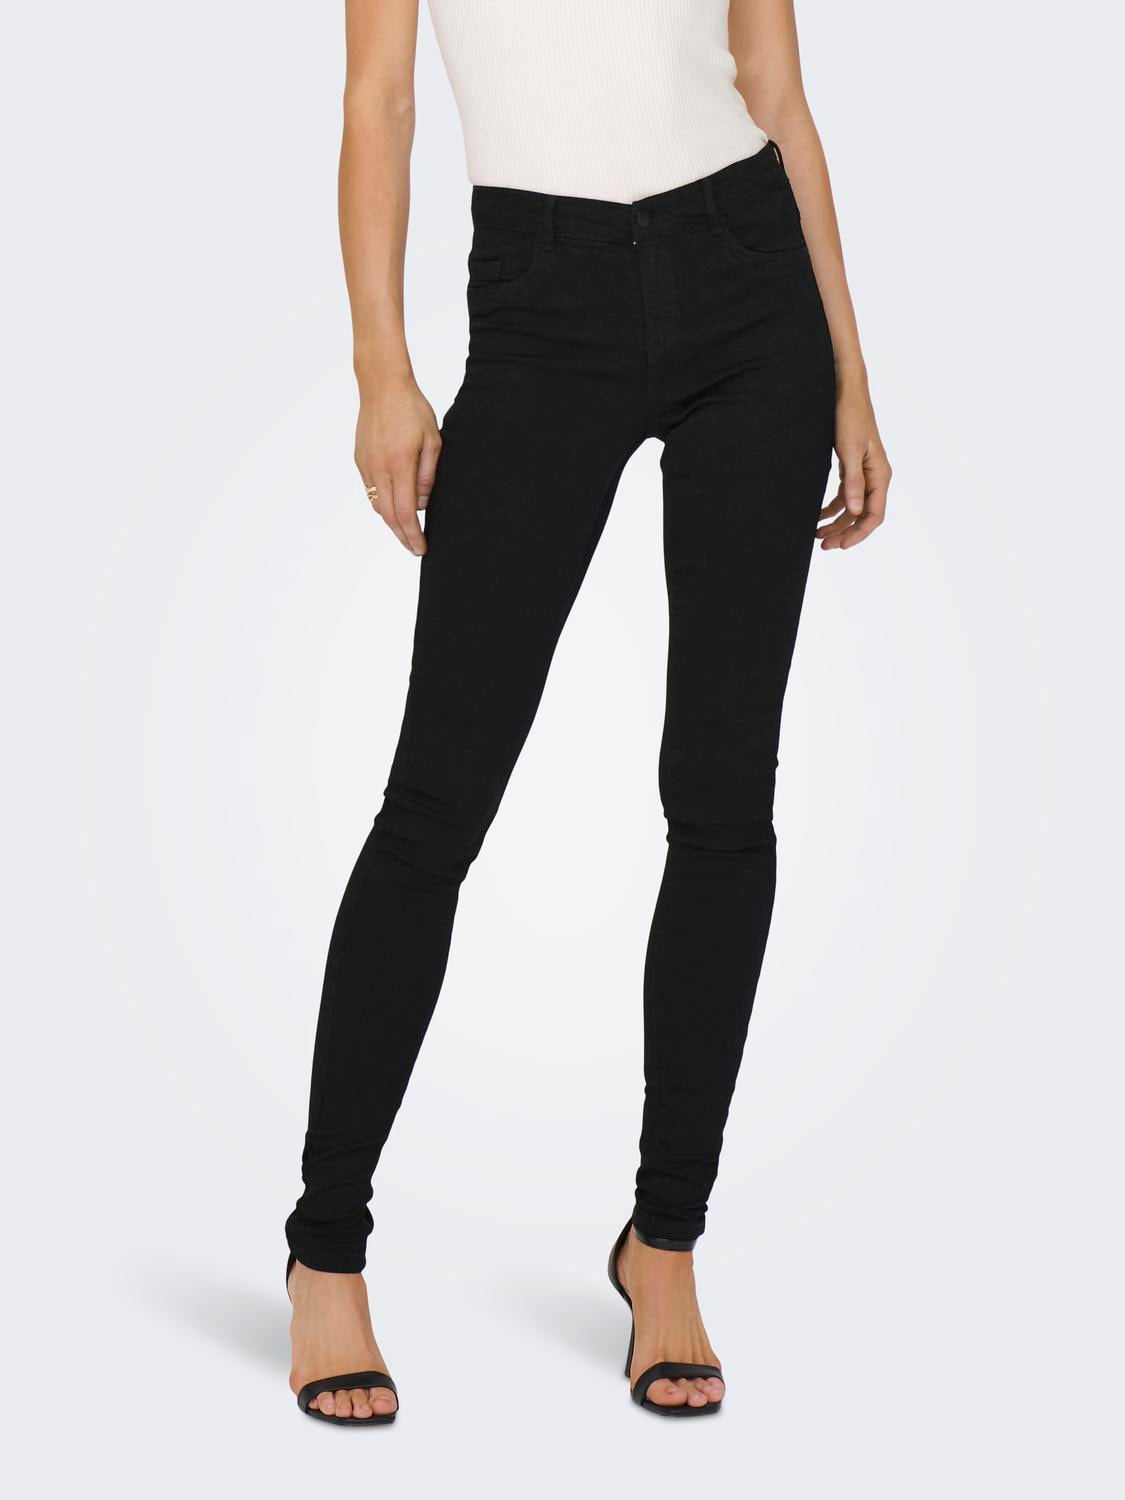 ONLY Jeans Skinny Fit Taille moyenne -Black Denim - 15129693